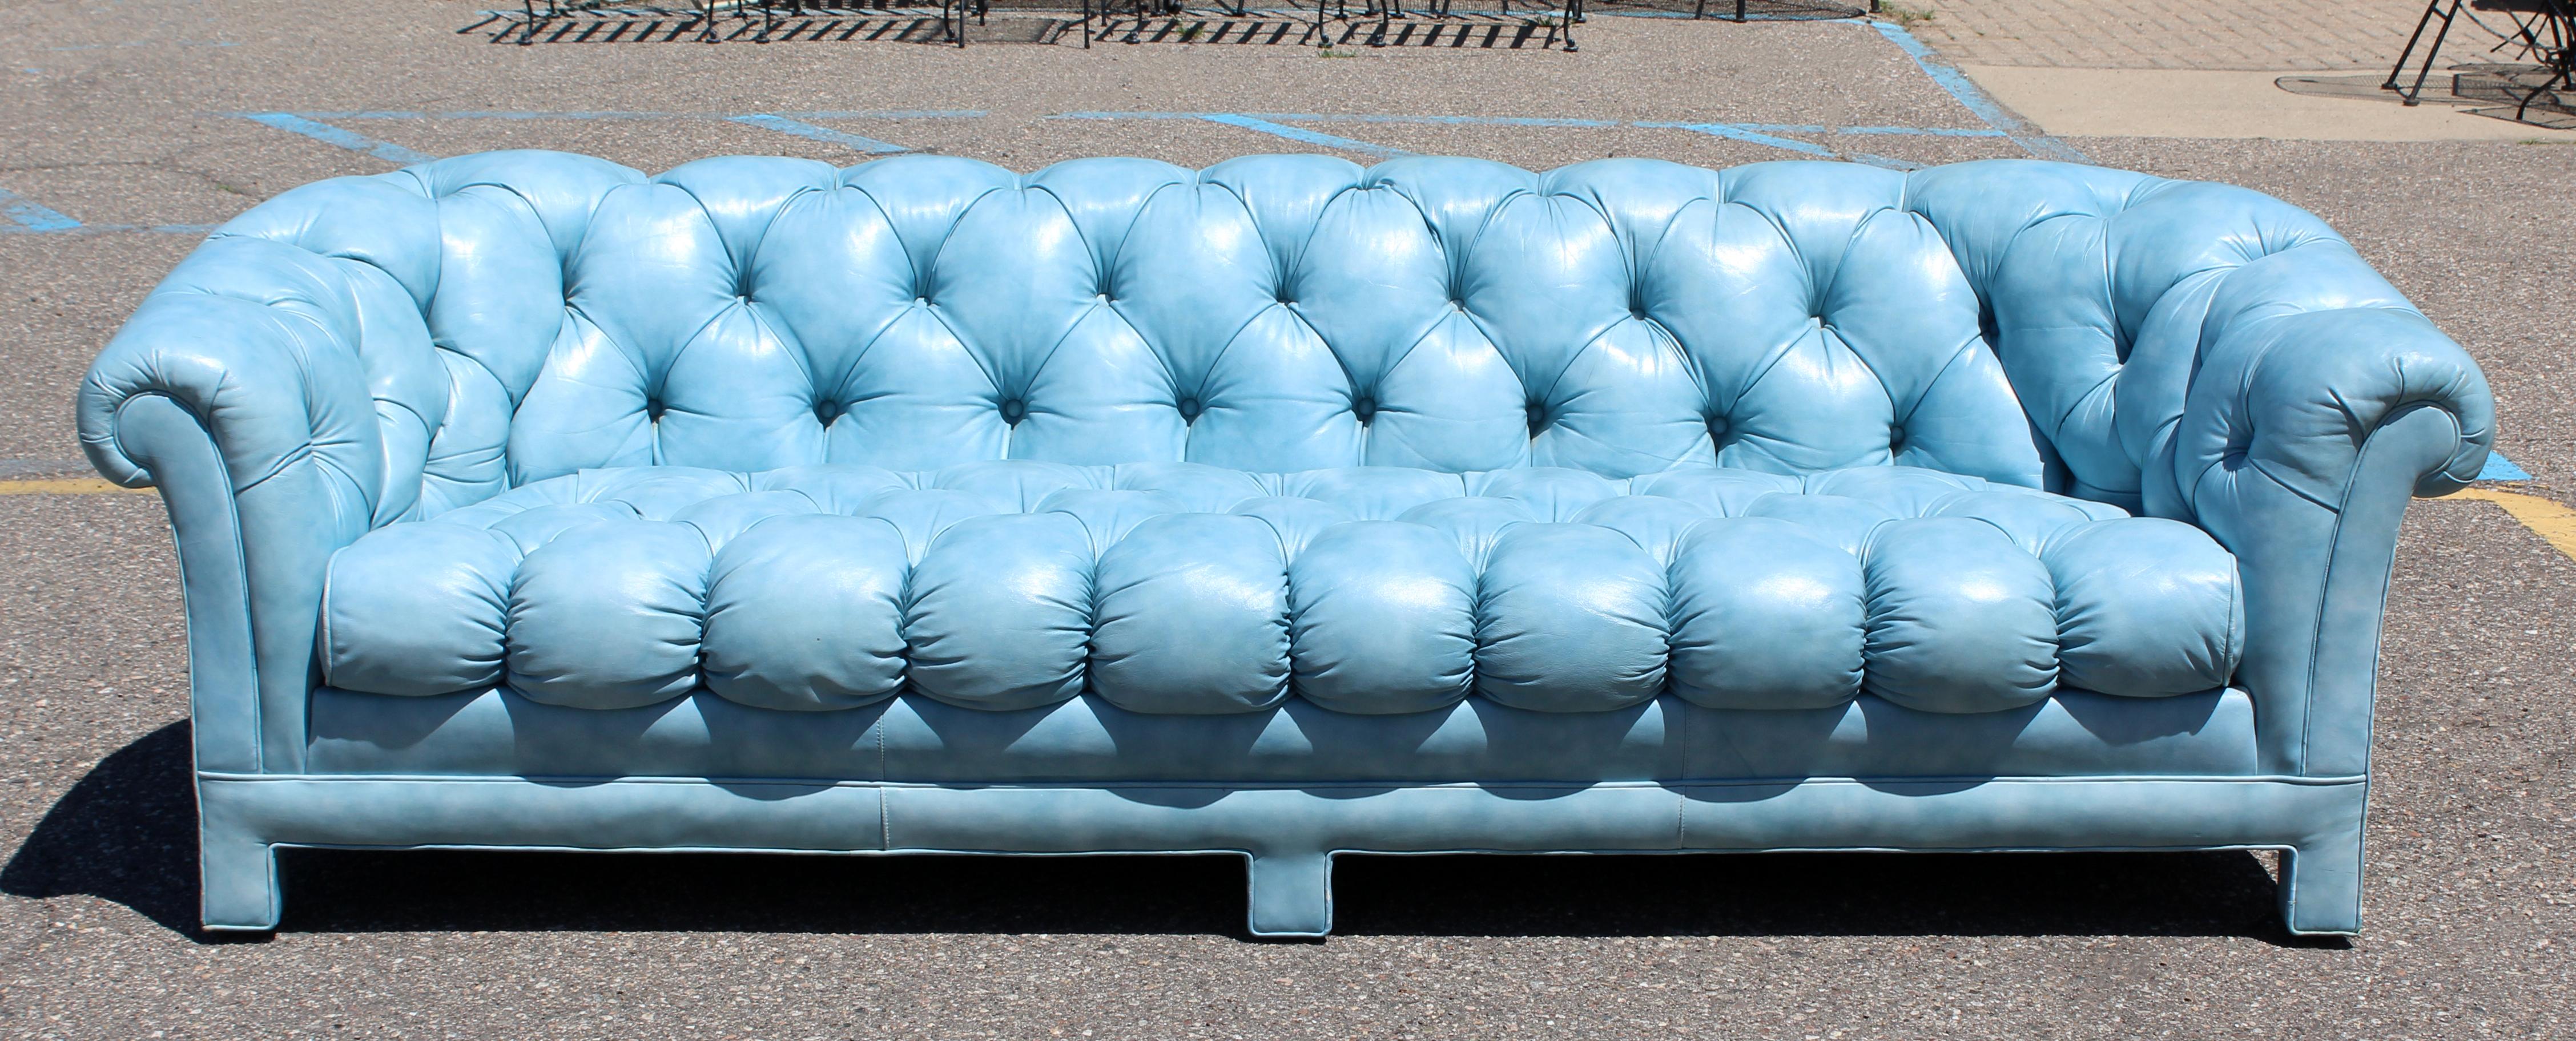 For your consideration is an incredible, curved, tufted blue leather sofa, by Classic Leather Furniture Inc., in the style of Milo Baughman, circa 1970s. In excellent condition. The dimensions are 90